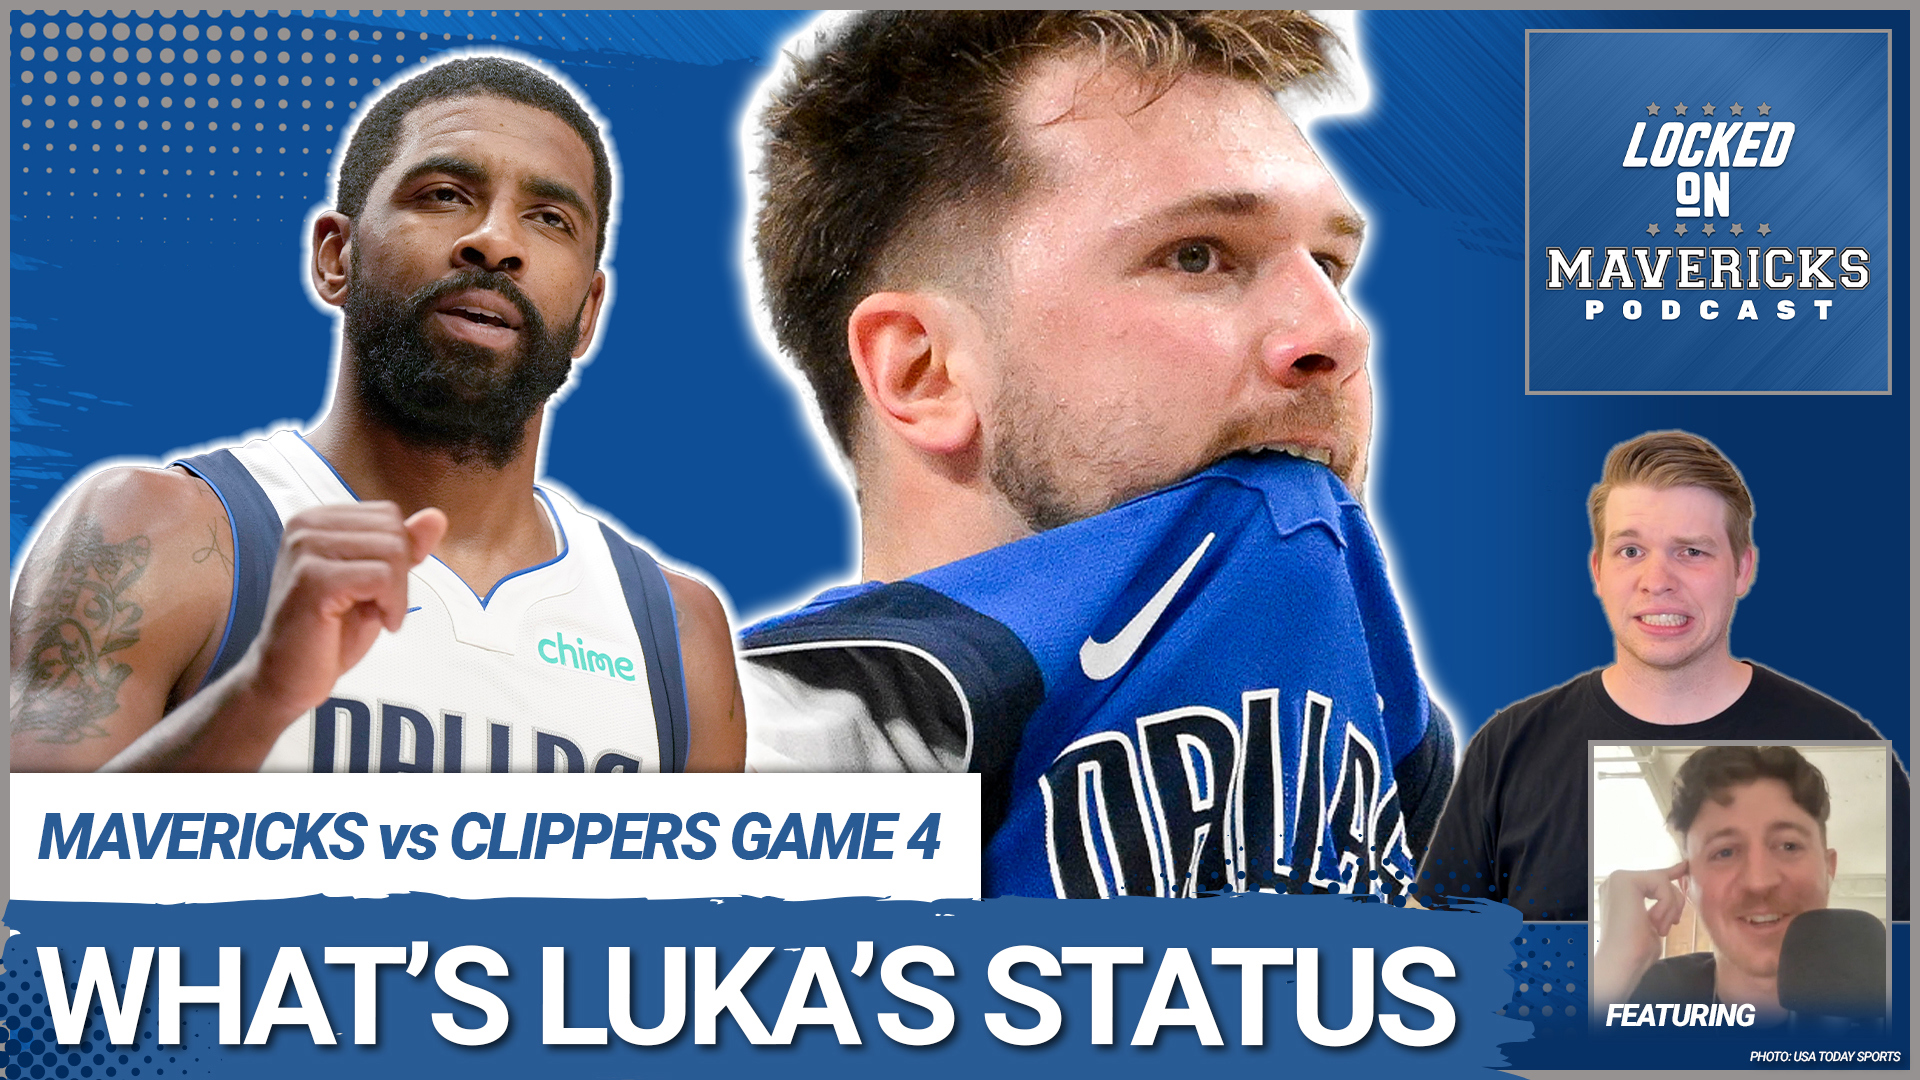 Nick Angstadt is joined by Tim Cato to breakdown the Dallas Mavericks vs Los Angeles Clippers series, Luka Doncic's knee, Kyrie Irving's contributions, and more.